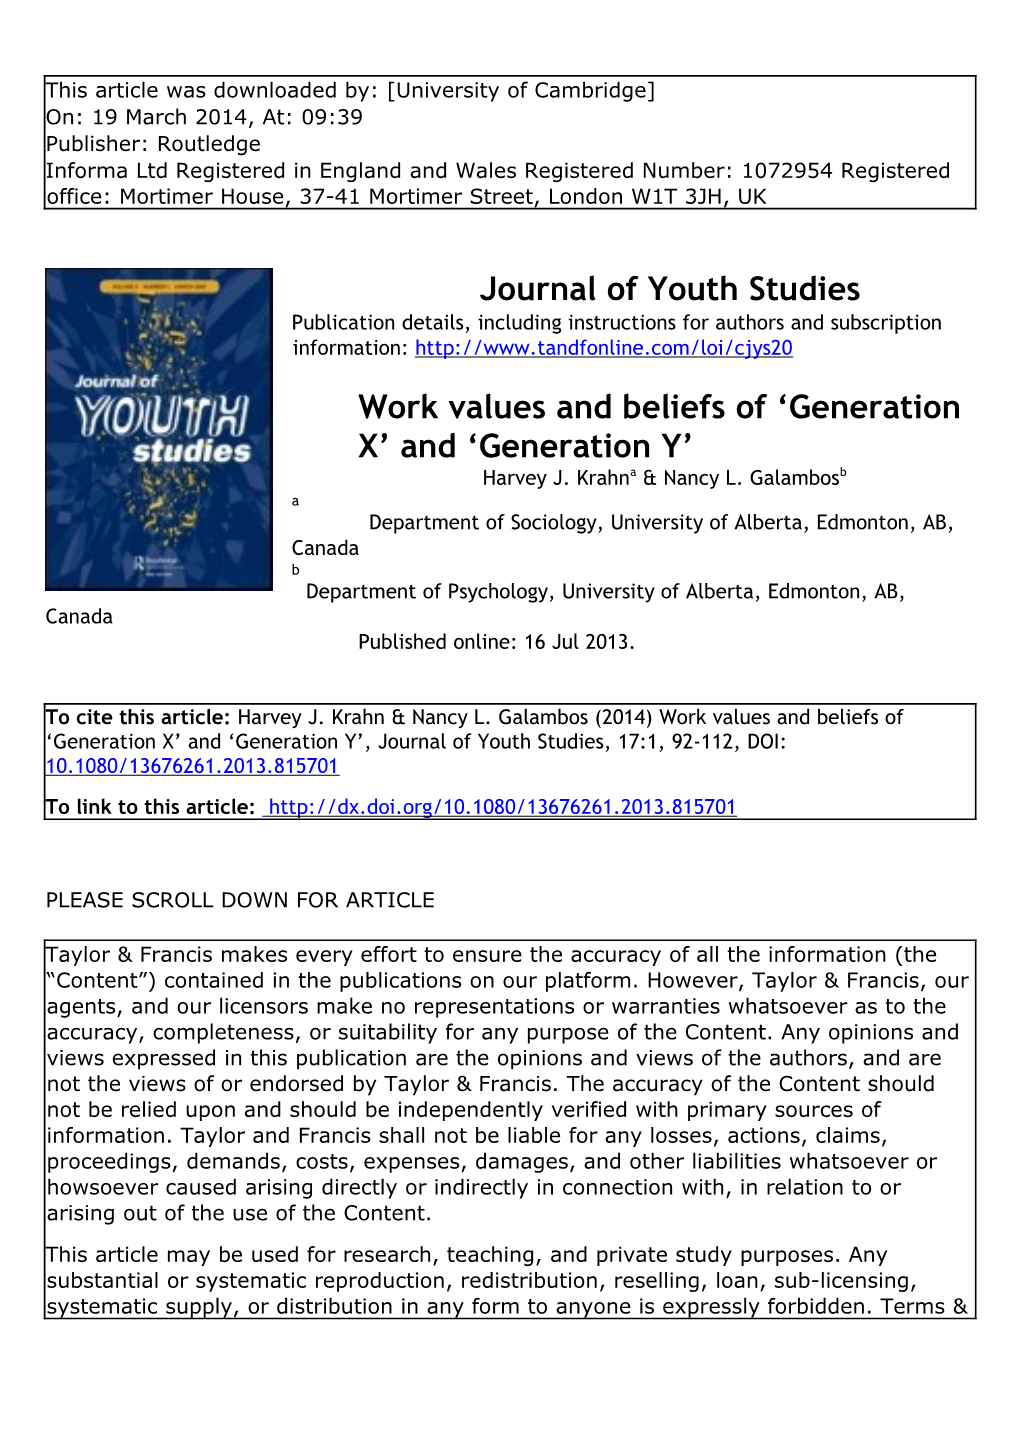 Work Values and Beliefs of 'Generation X' and 'Generation Y'